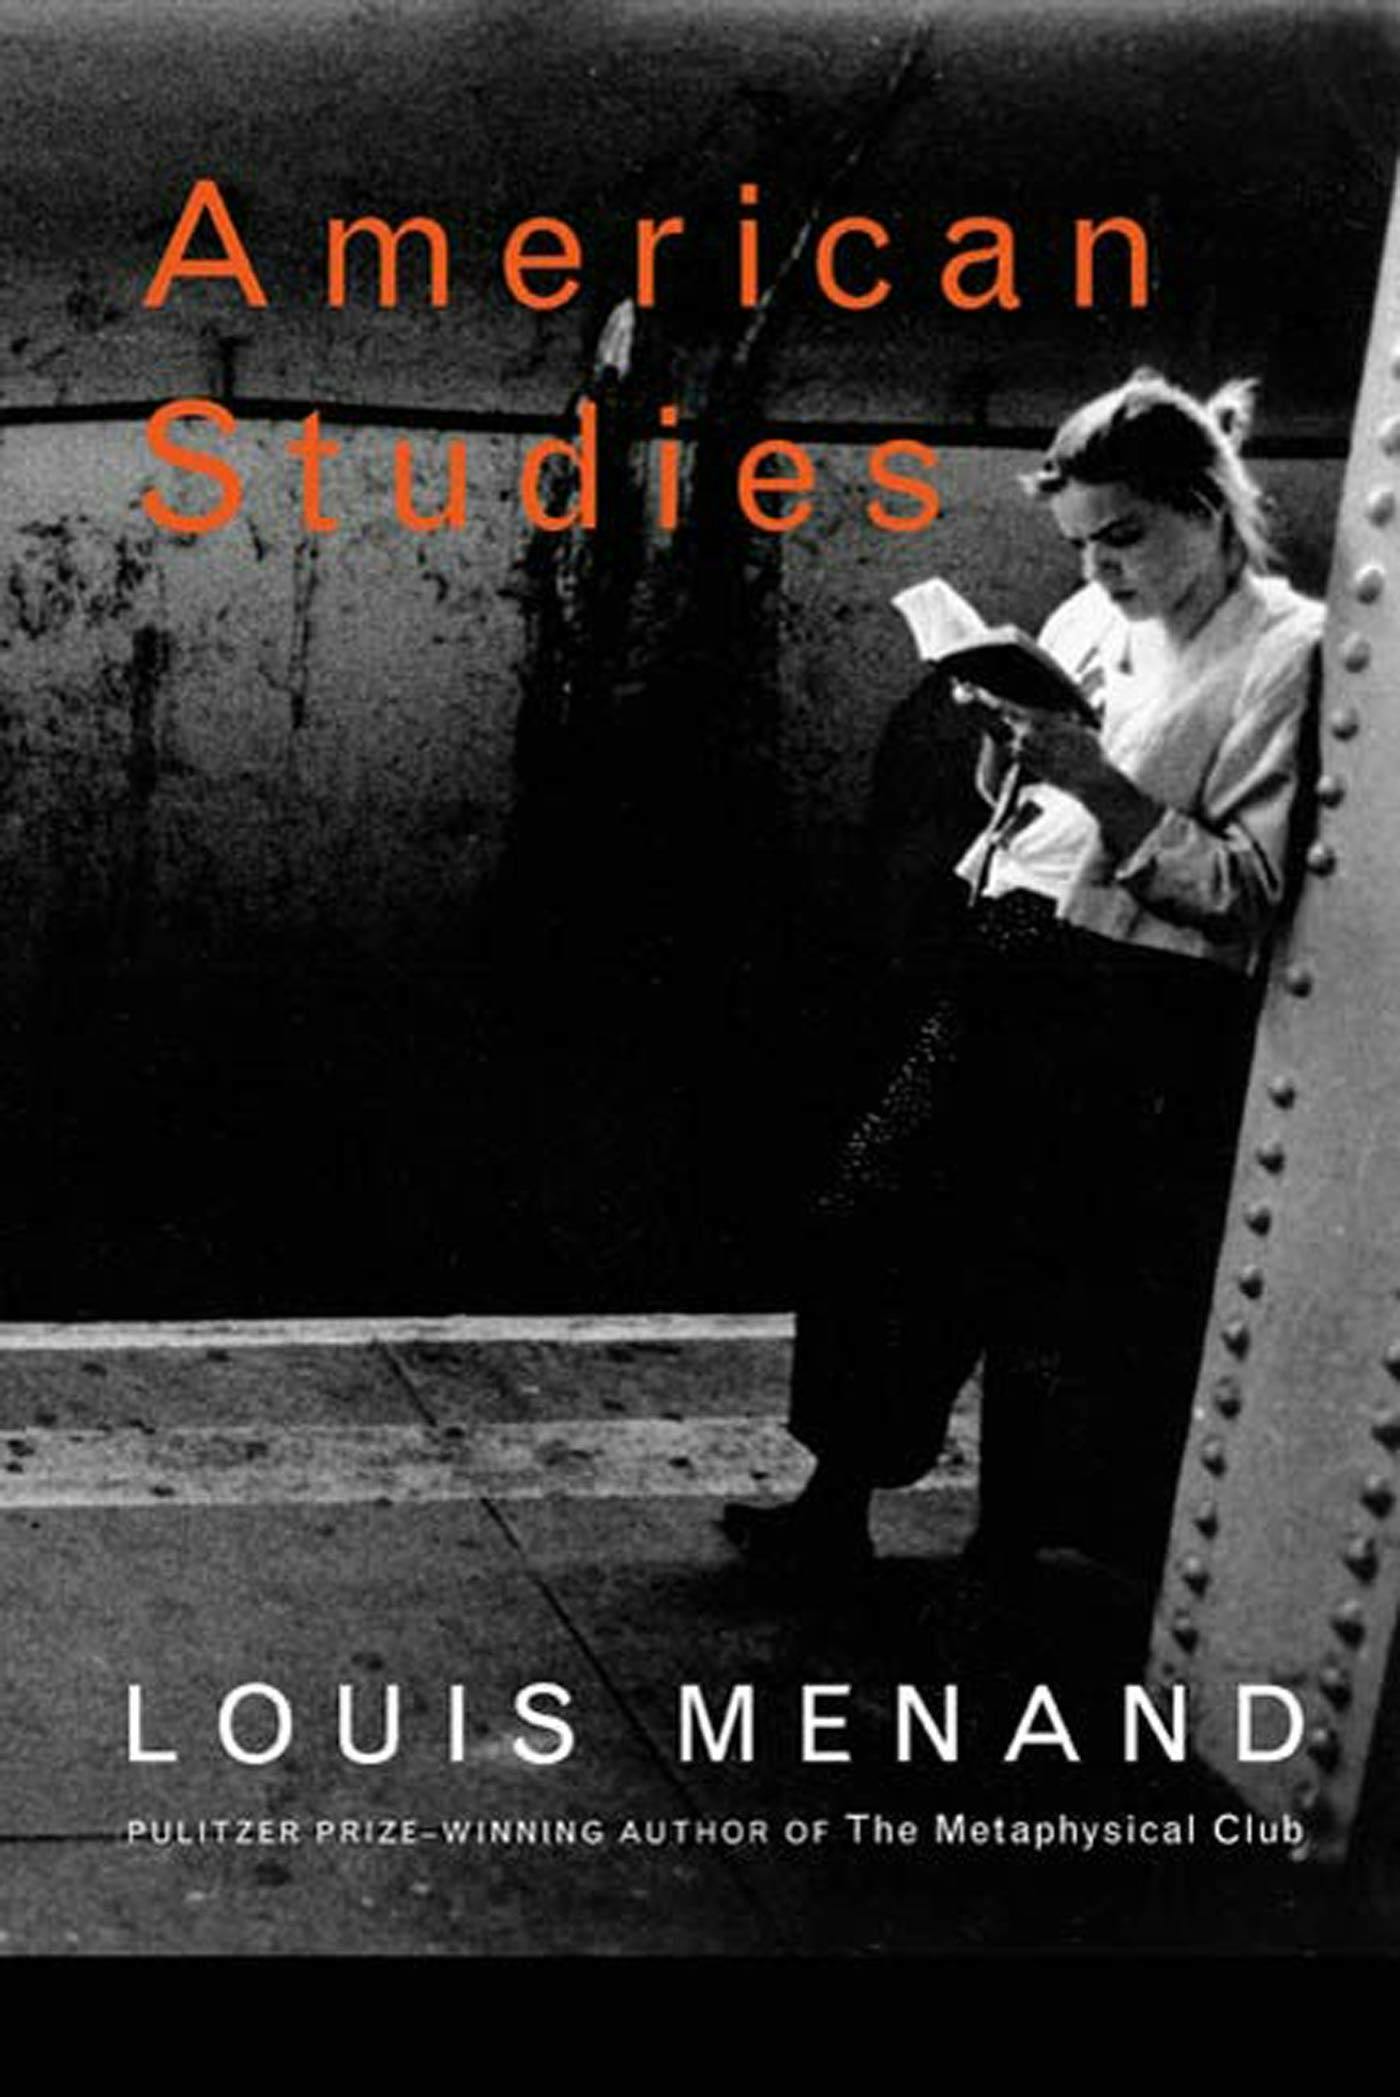 Louis Menand: author of The Metaphysical Club - discusses American